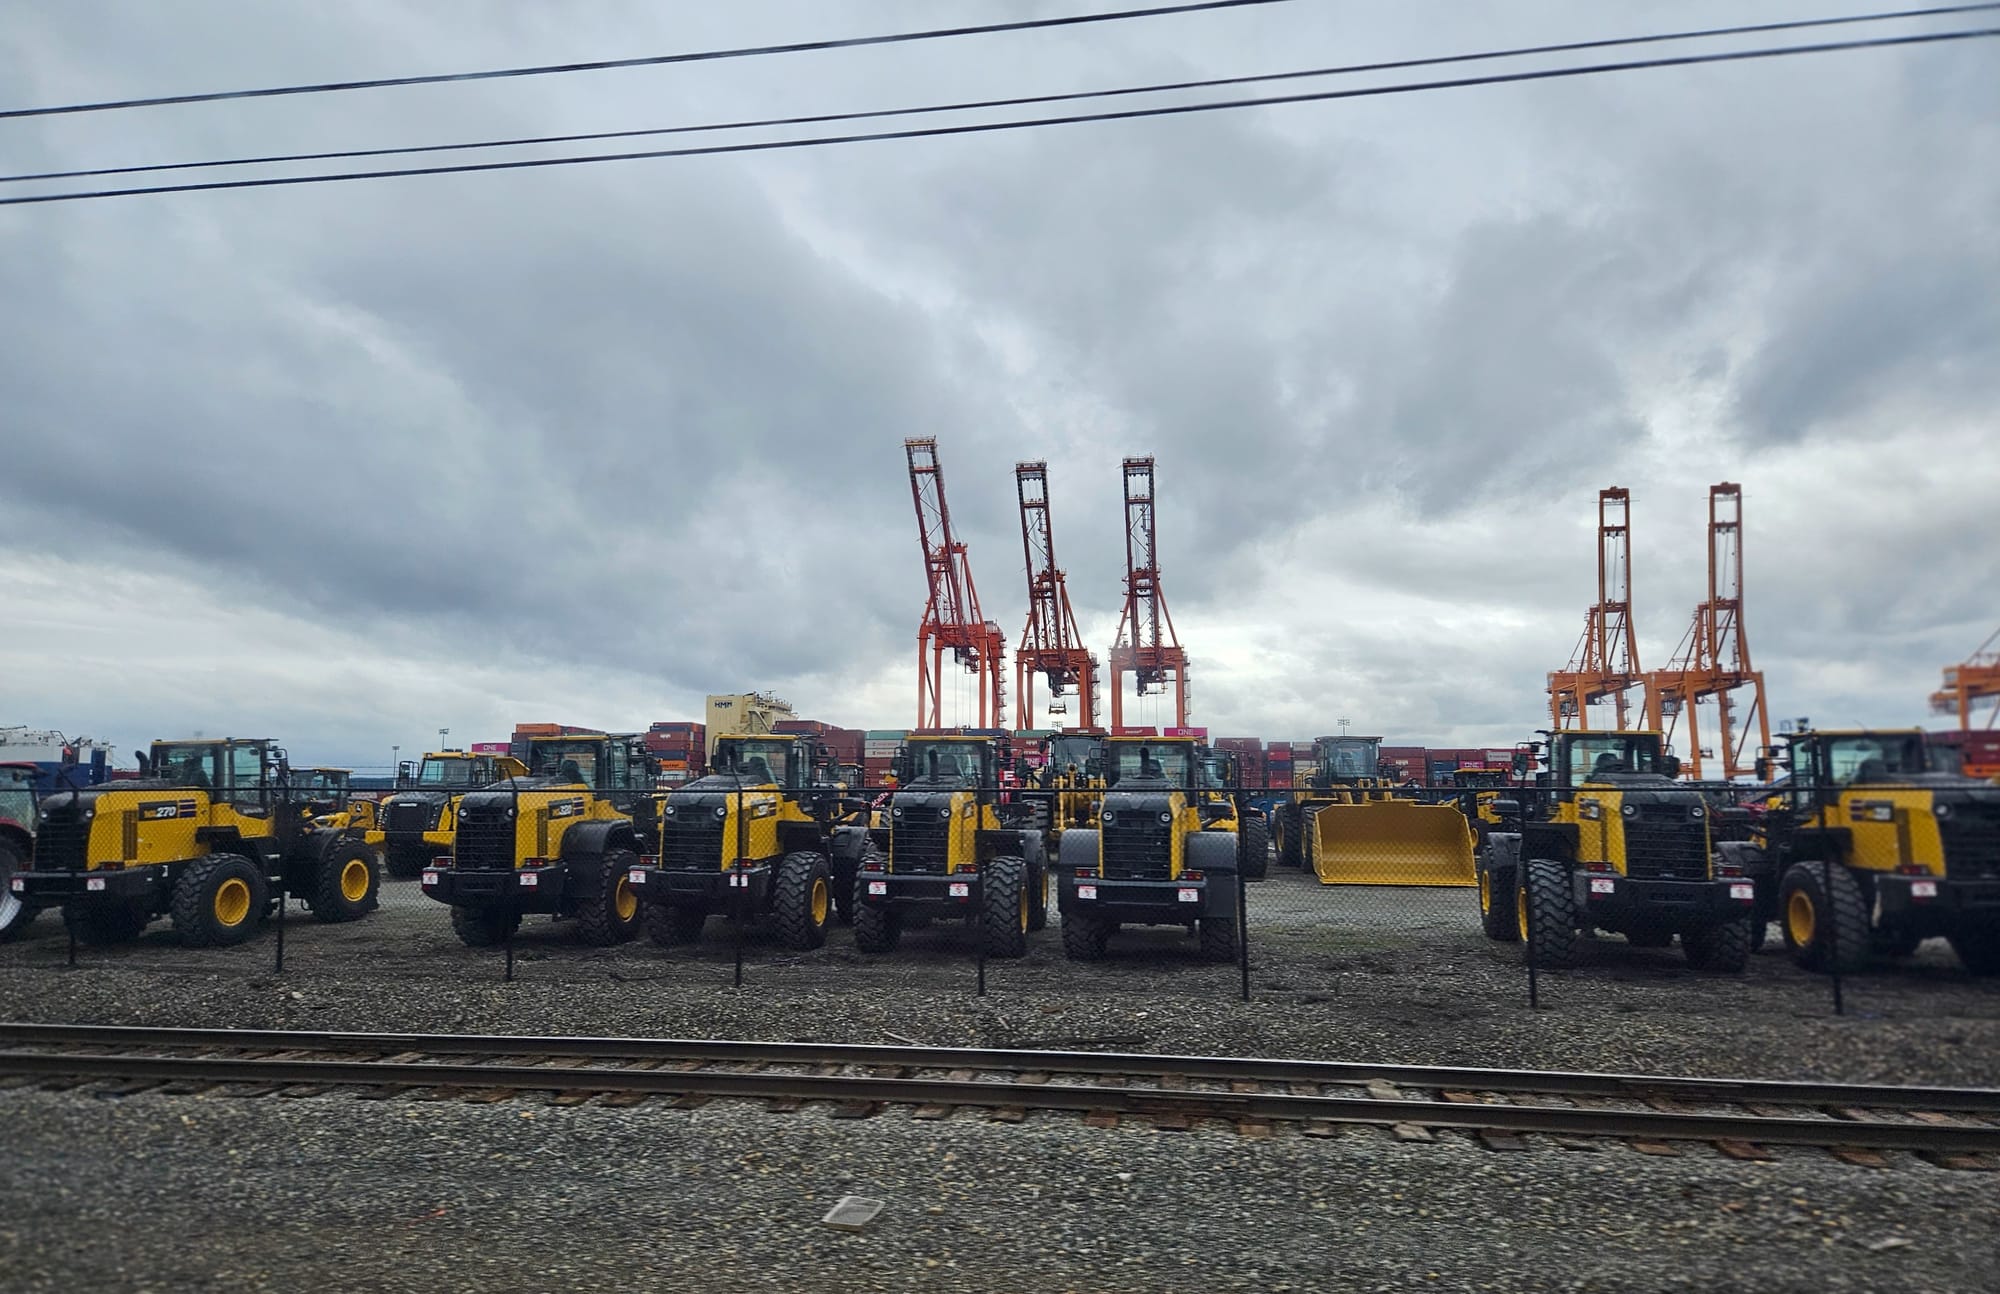 Large yellow tractors fill a parking lot with cranes behind and railroad tracks in the foreground.